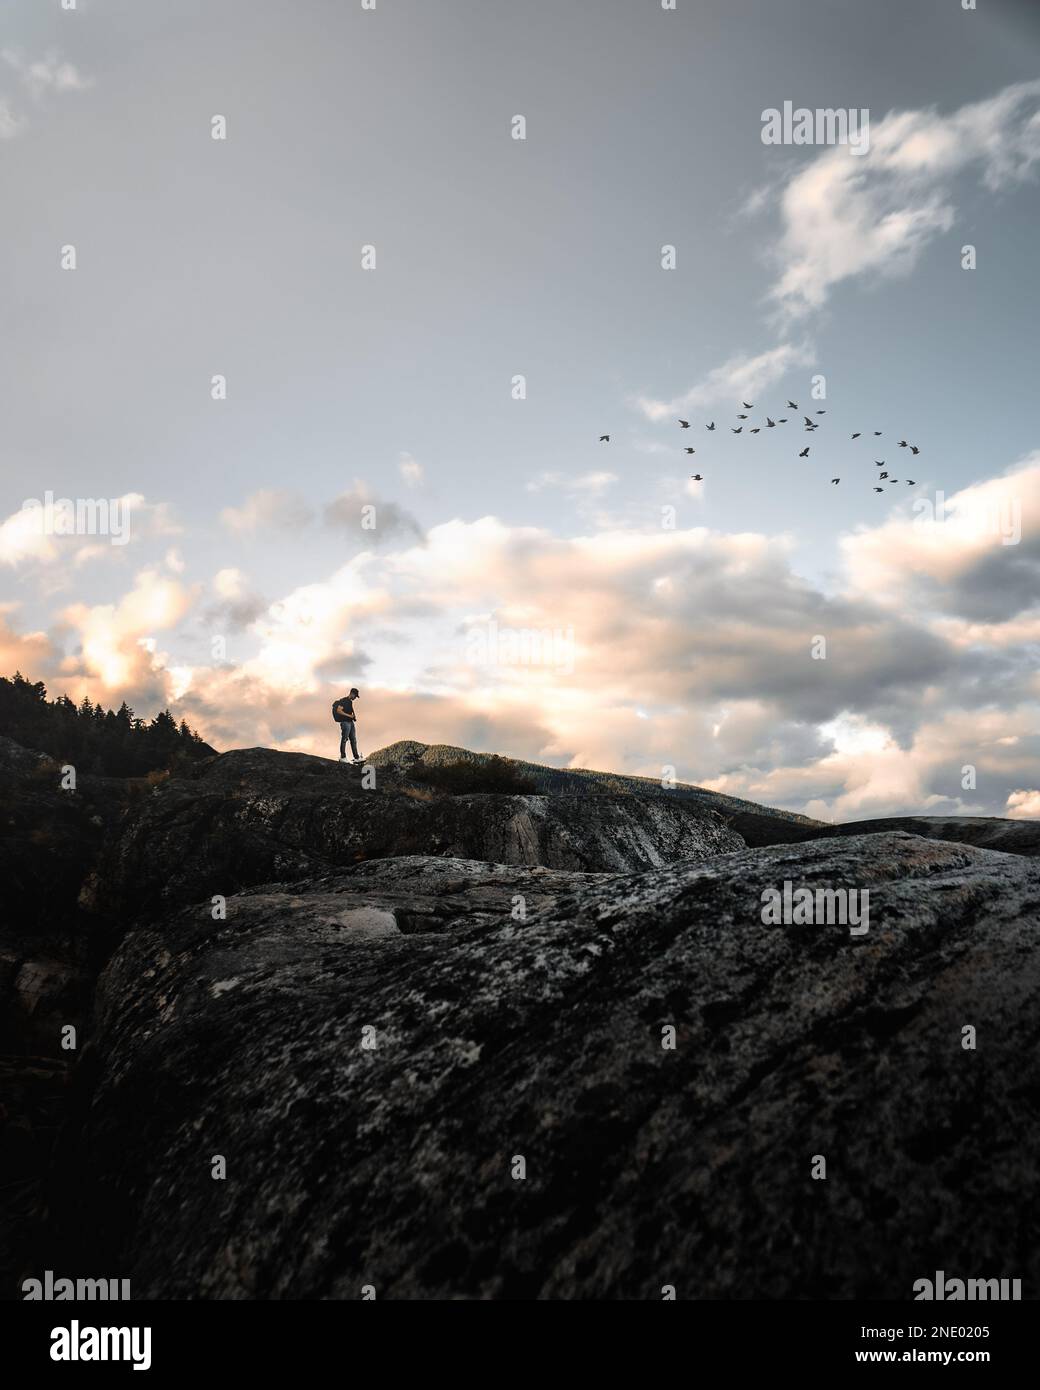 man standing on mountain with birds flying above Stock Photo